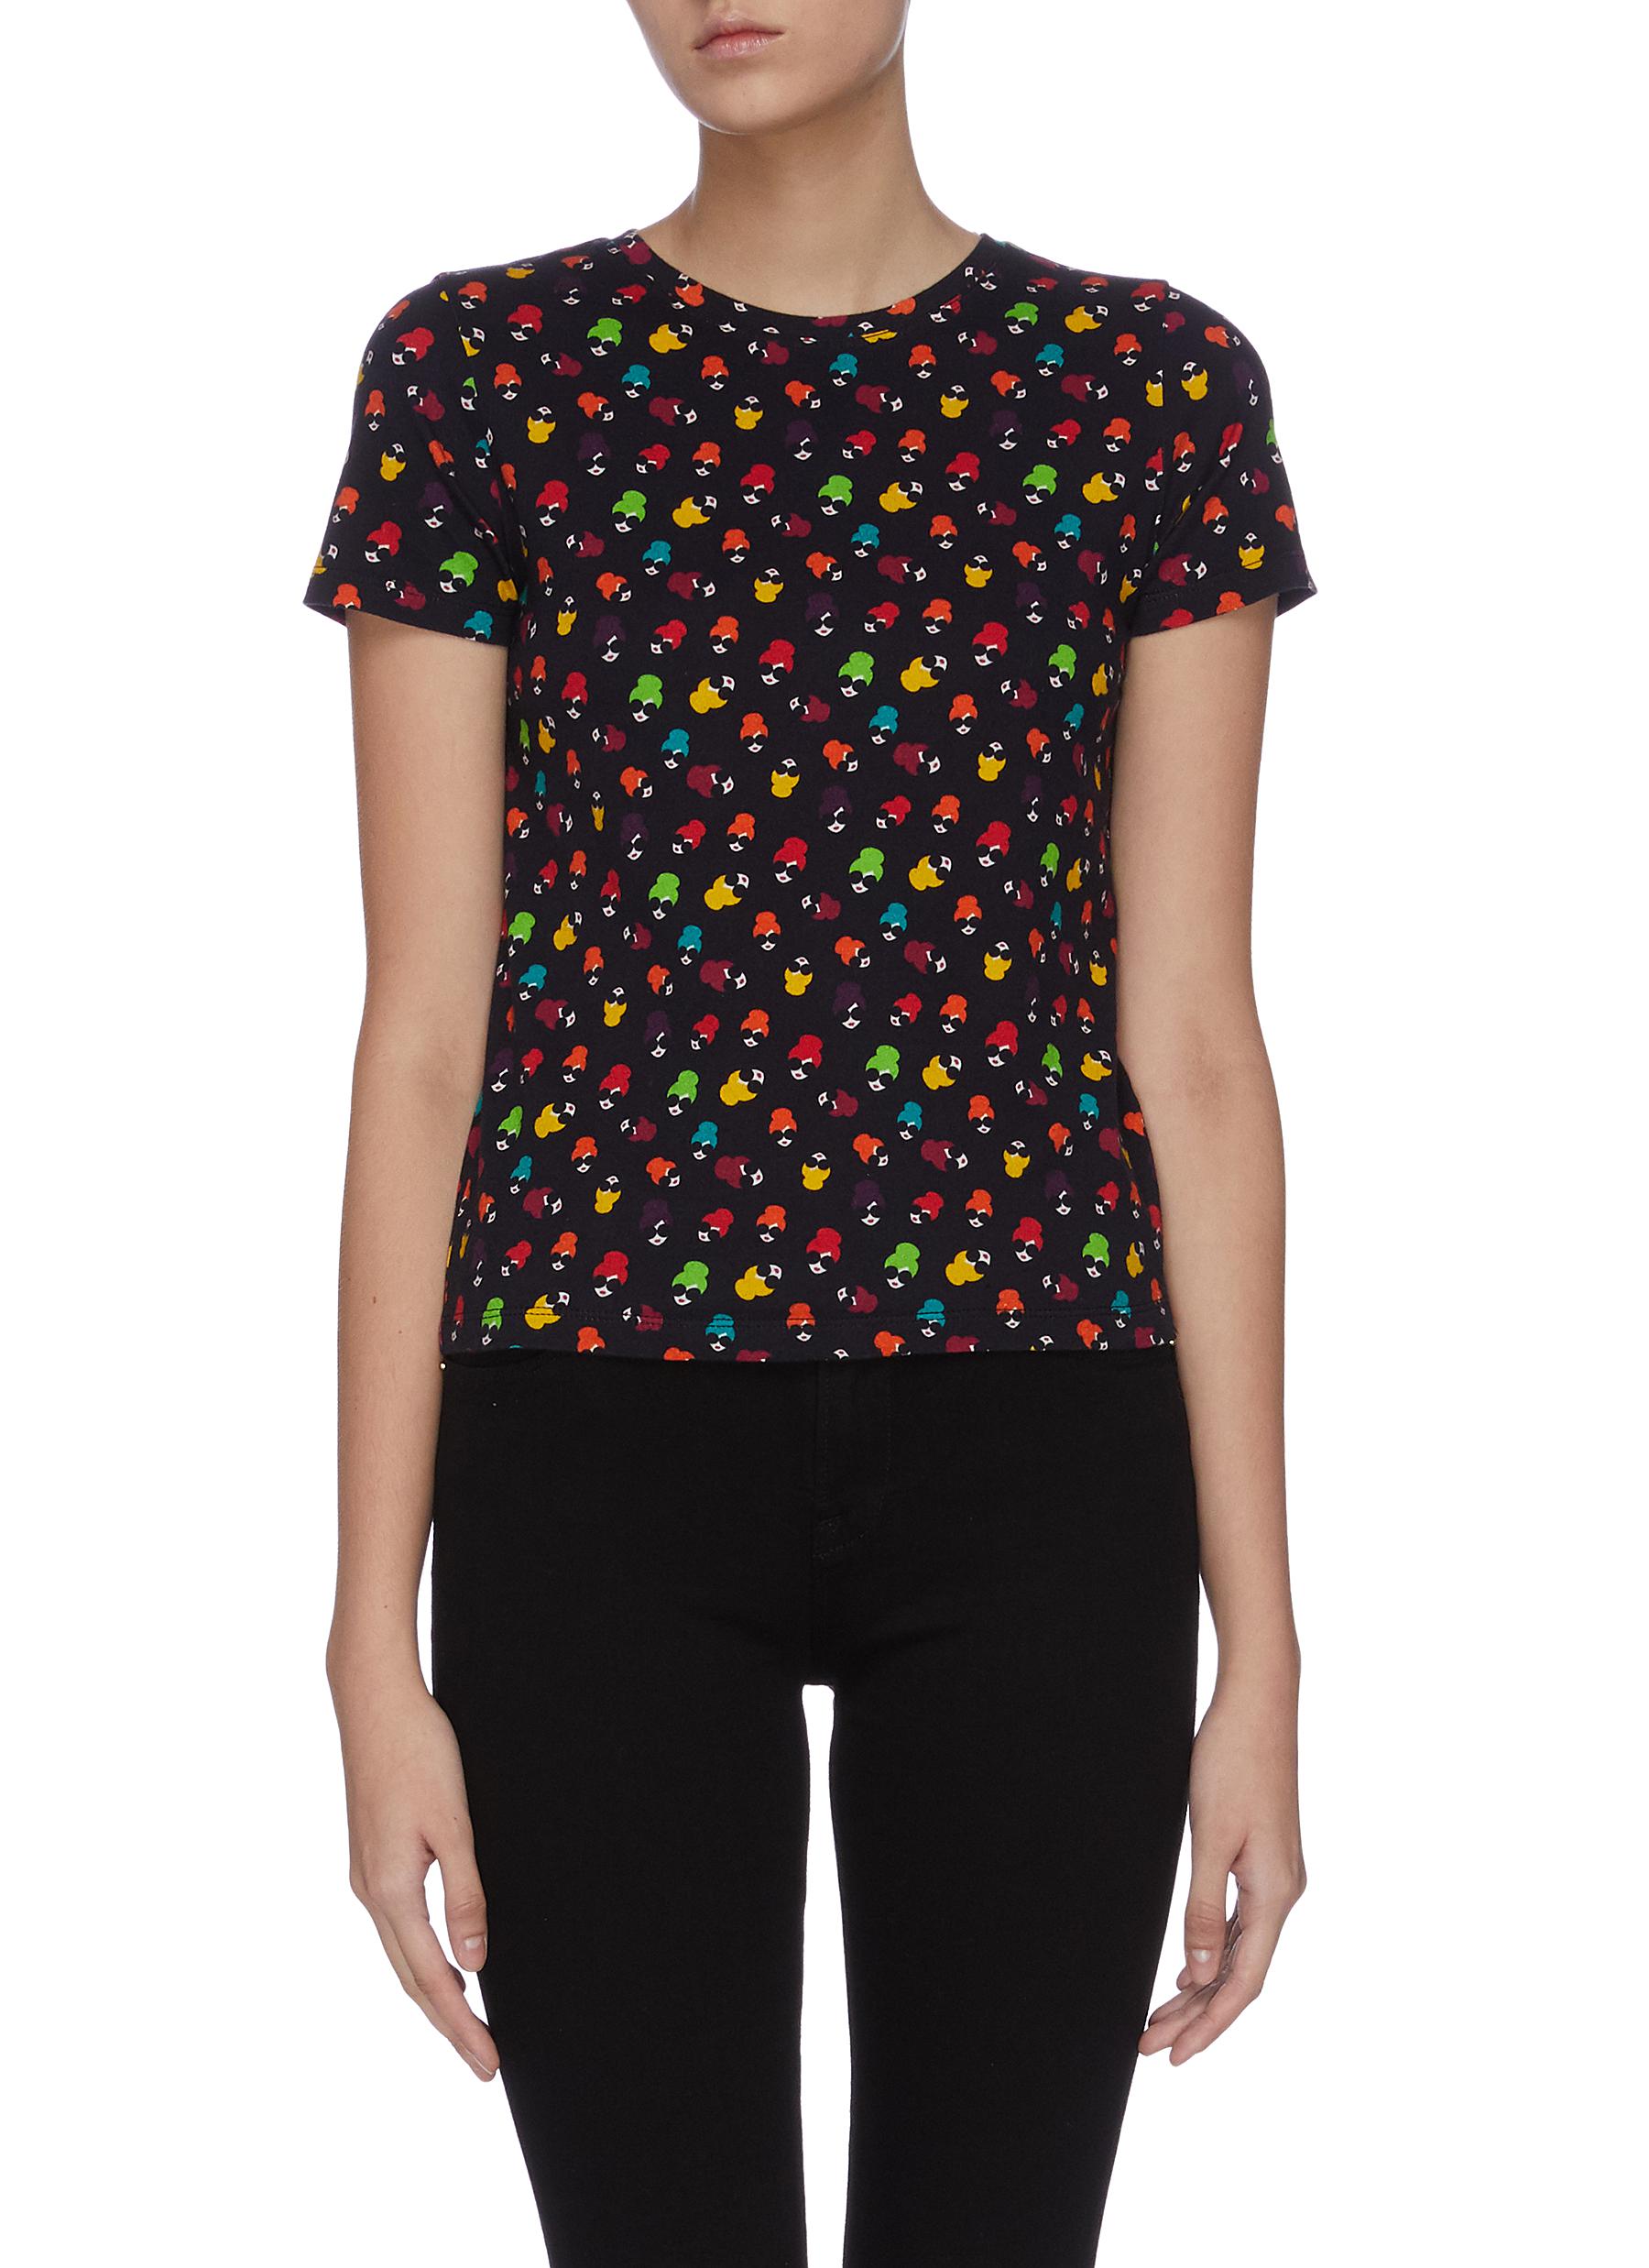 Rylyn graphic print T-shirt by Alice + Olivia